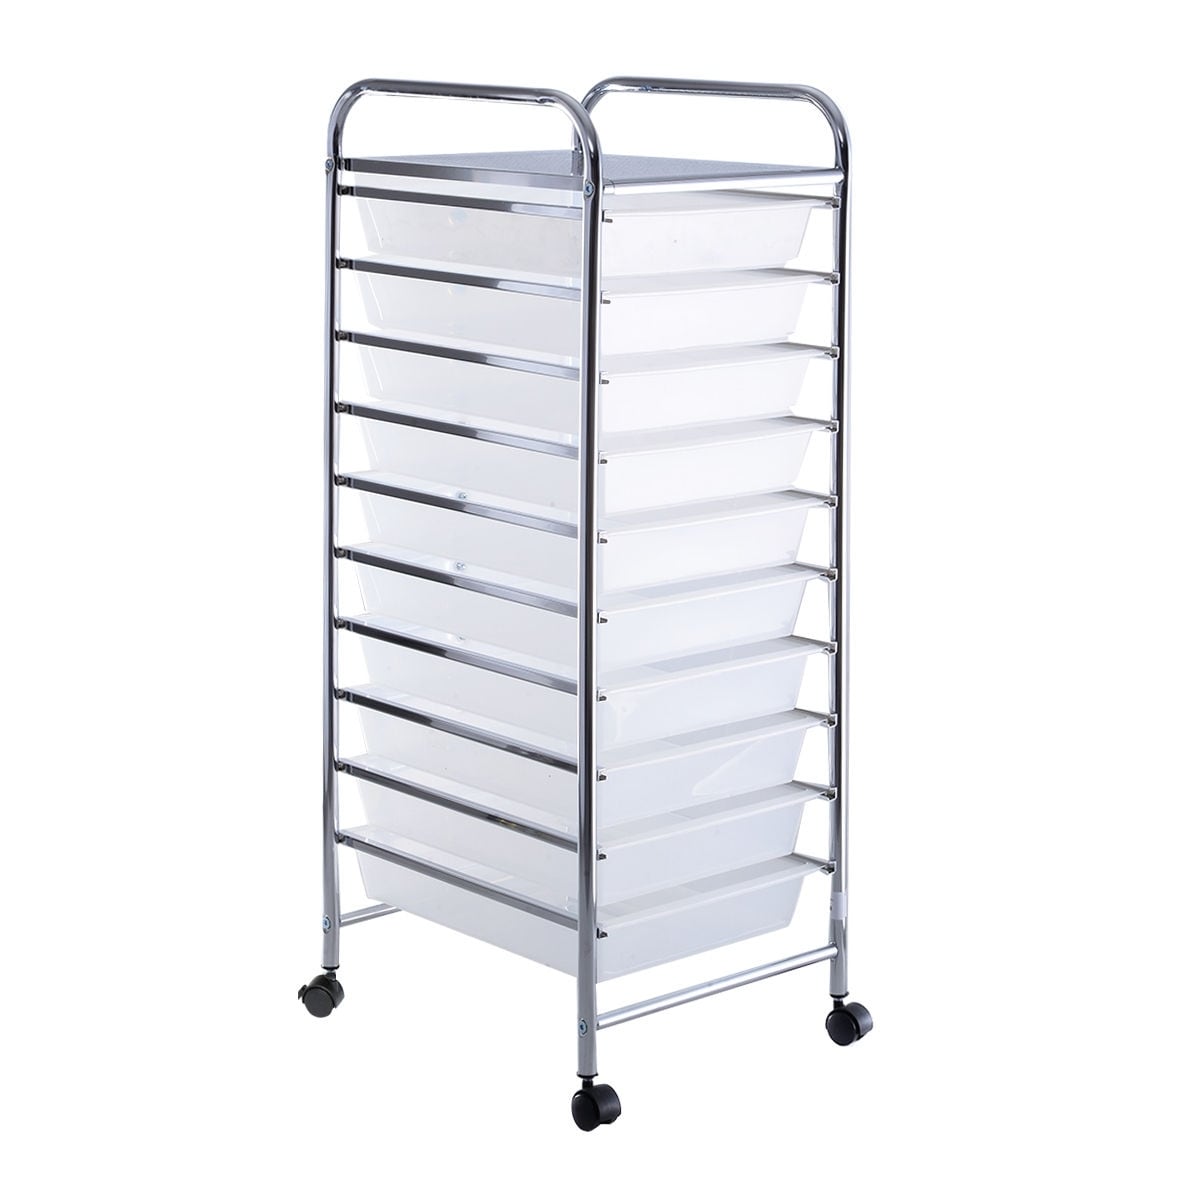 https://ak1.ostkcdn.com/images/products/is/images/direct/6c50b7c953999844b69660b963bf579de49359d8/10-Drawer-Rolling-Storage-Cart-Organizer-Clear.jpg